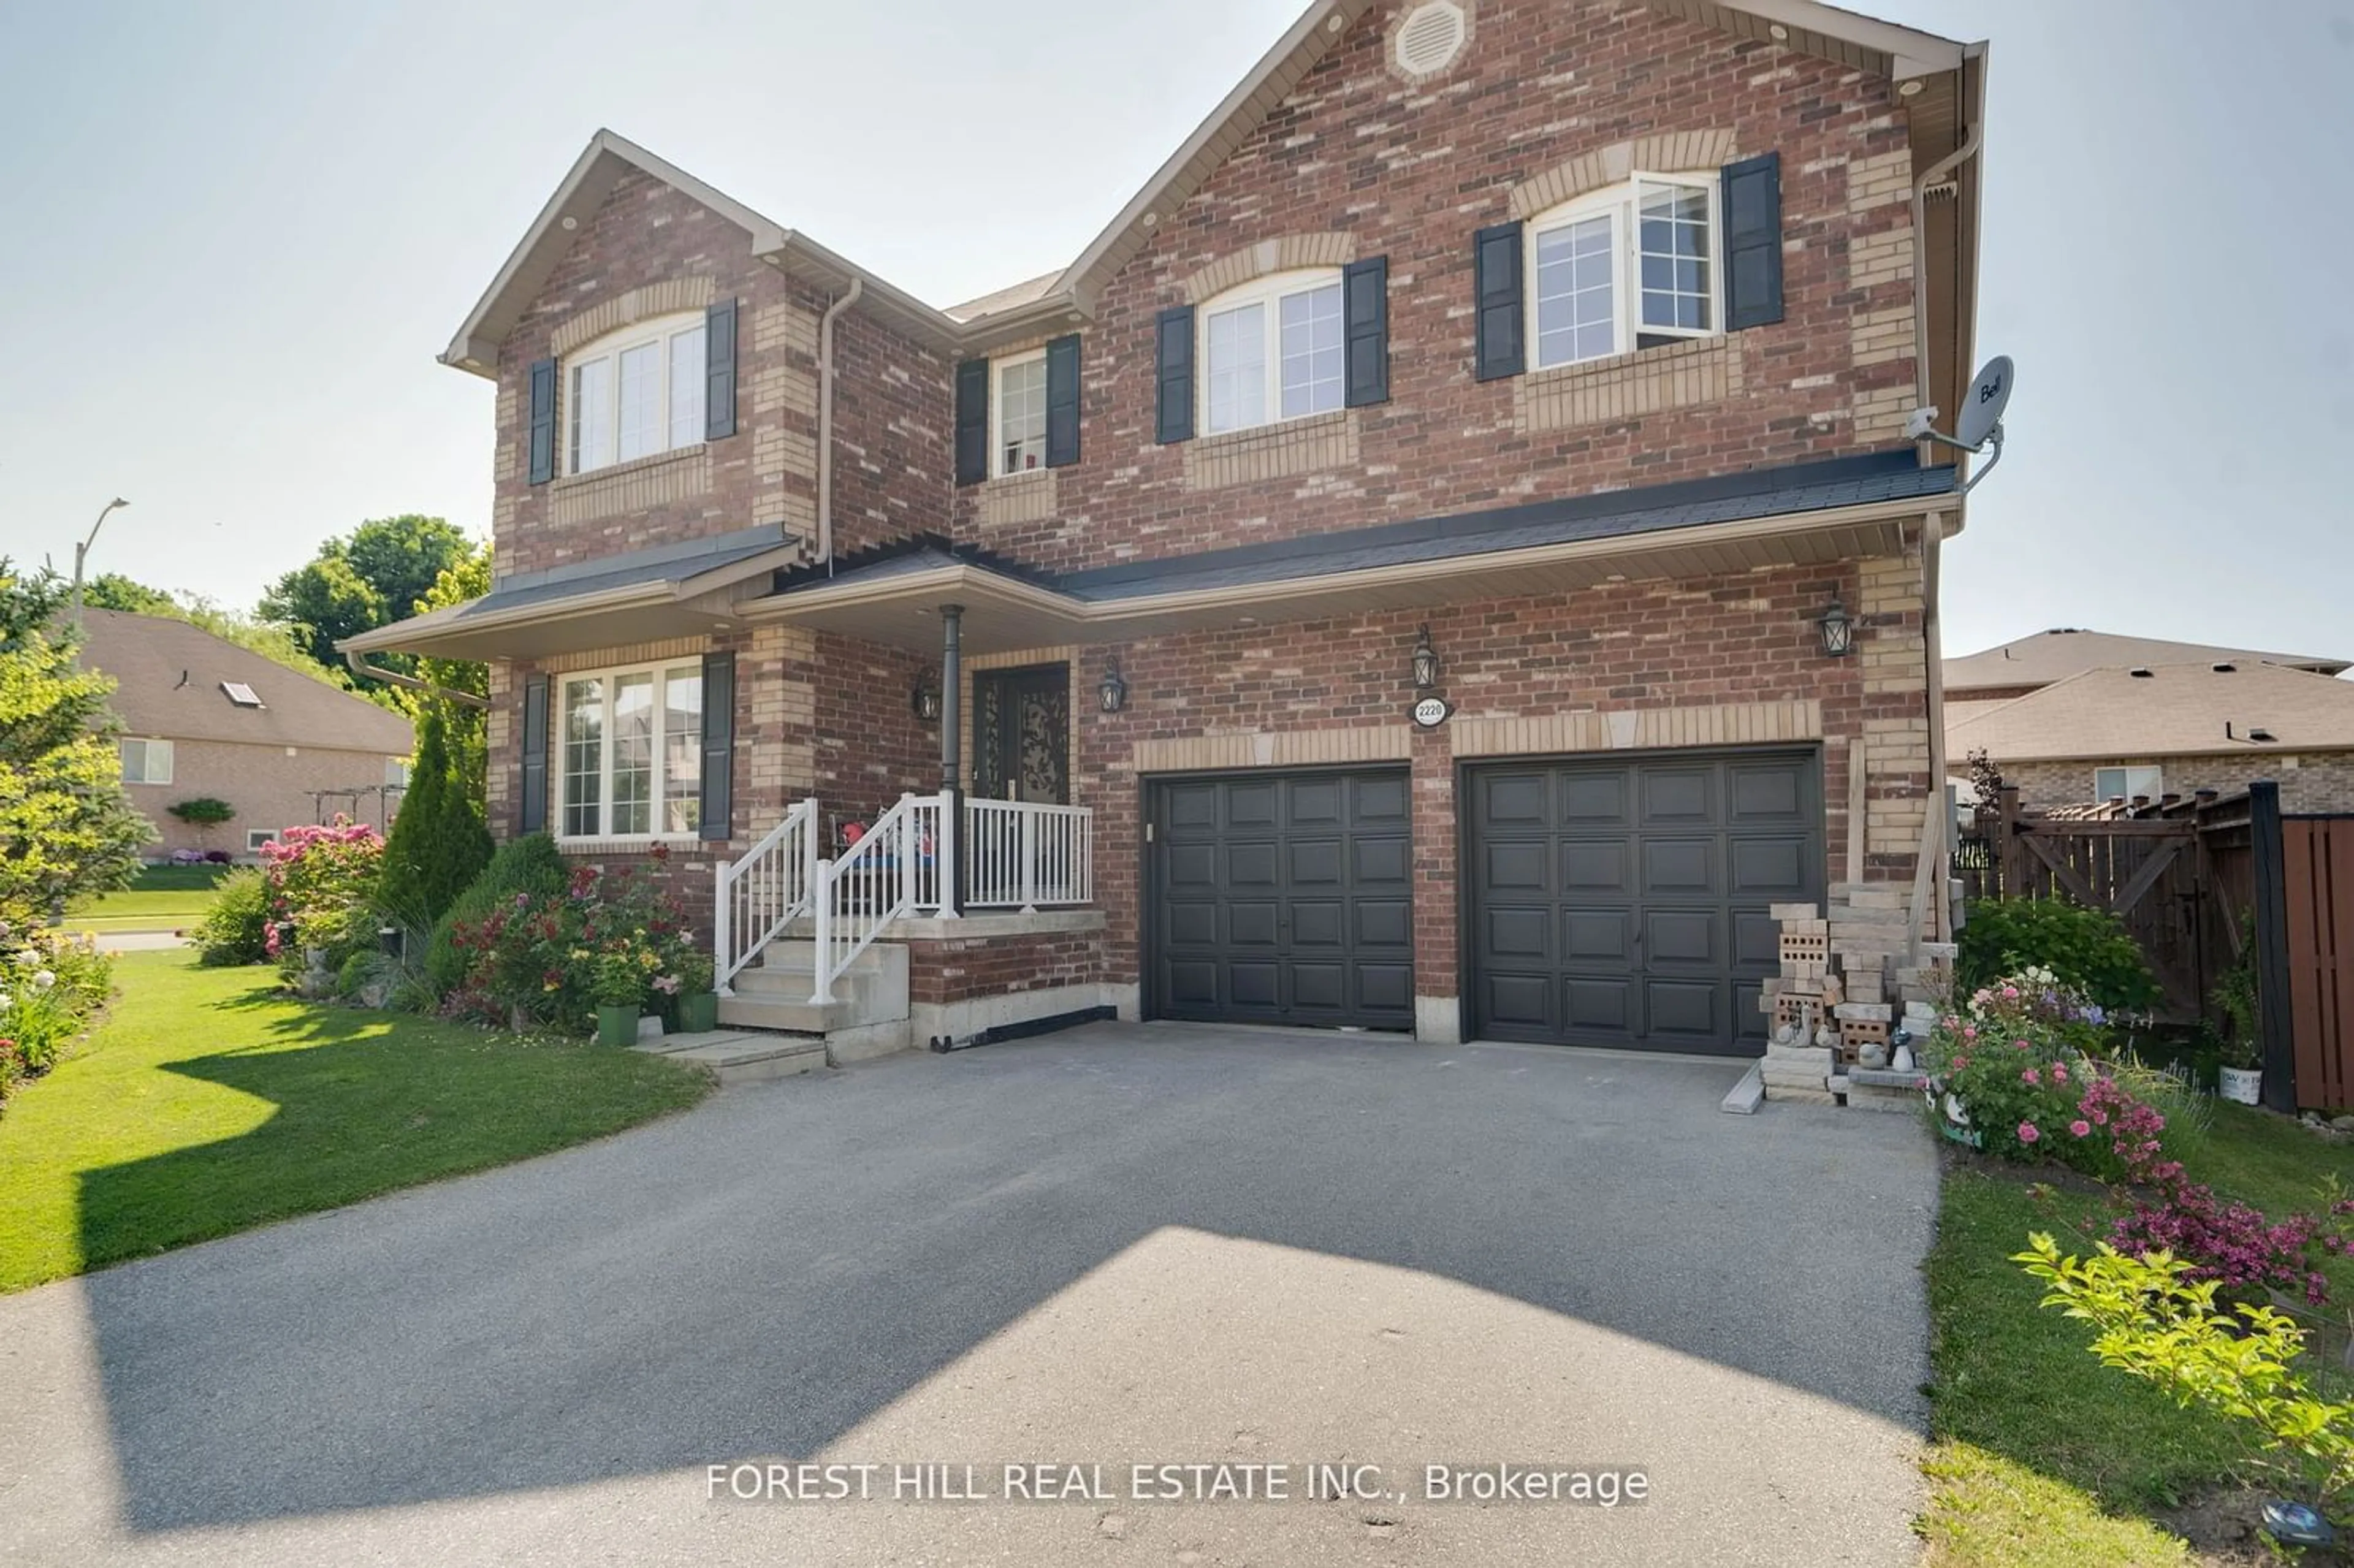 Home with brick exterior material for 2220 Nevils St, Innisfil Ontario L9S 0E2